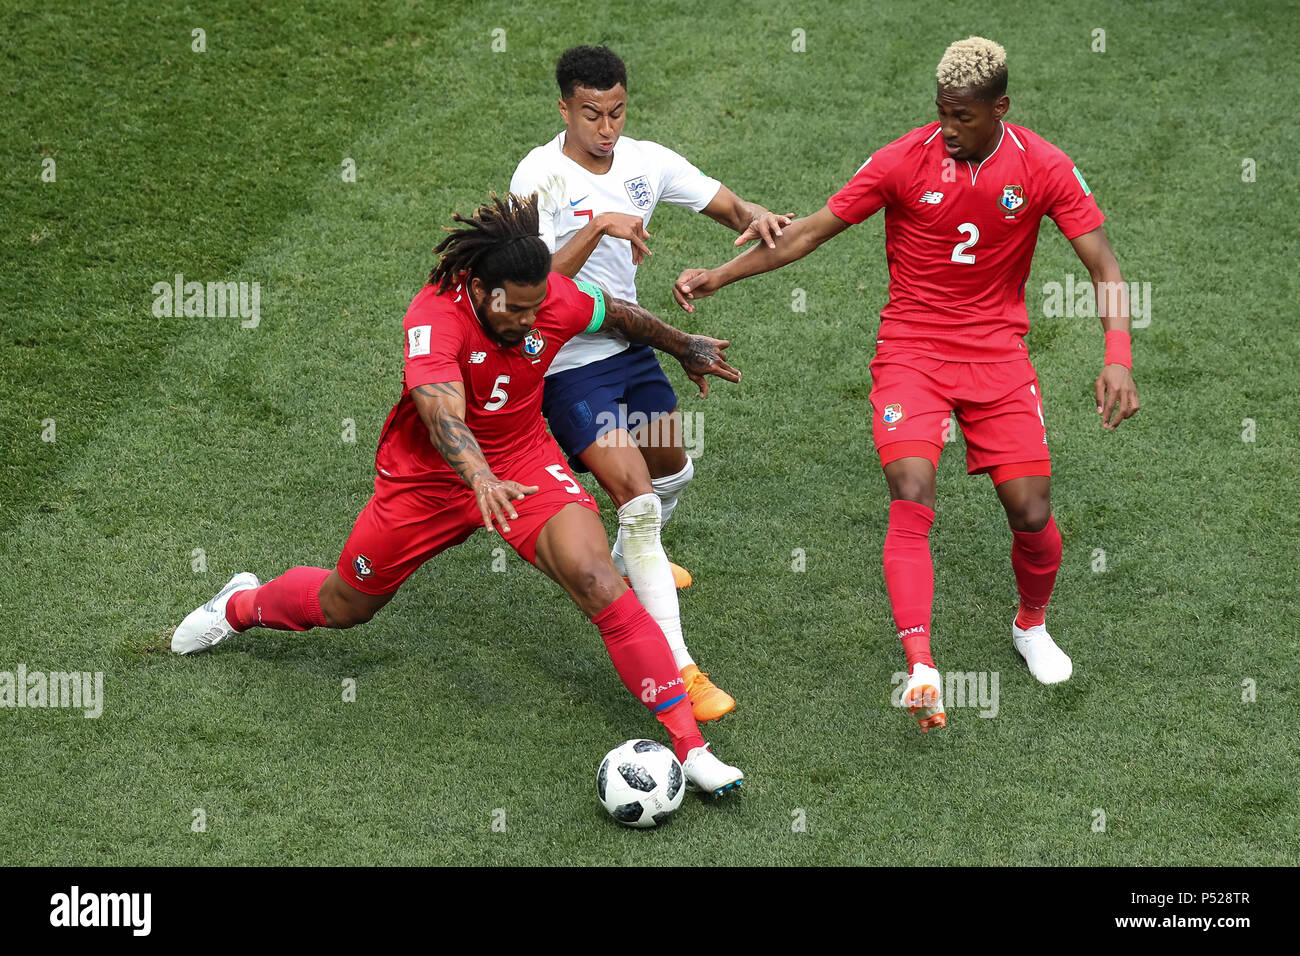 Nizhny Novgorod, Russia. 24th June, 2018. Roman Torres of Panama, Jesse Lingard of England and Michael Murillo of Panama during the 2018 FIFA World Cup Group G match between England and Panama at Nizhny Novgorod Stadium on June 24th 2018 in Nizhny Novgorod, Russia. (Photo by Daniel Chesterton/phcimages.com) Credit: PHC Images/Alamy Live News Stock Photo